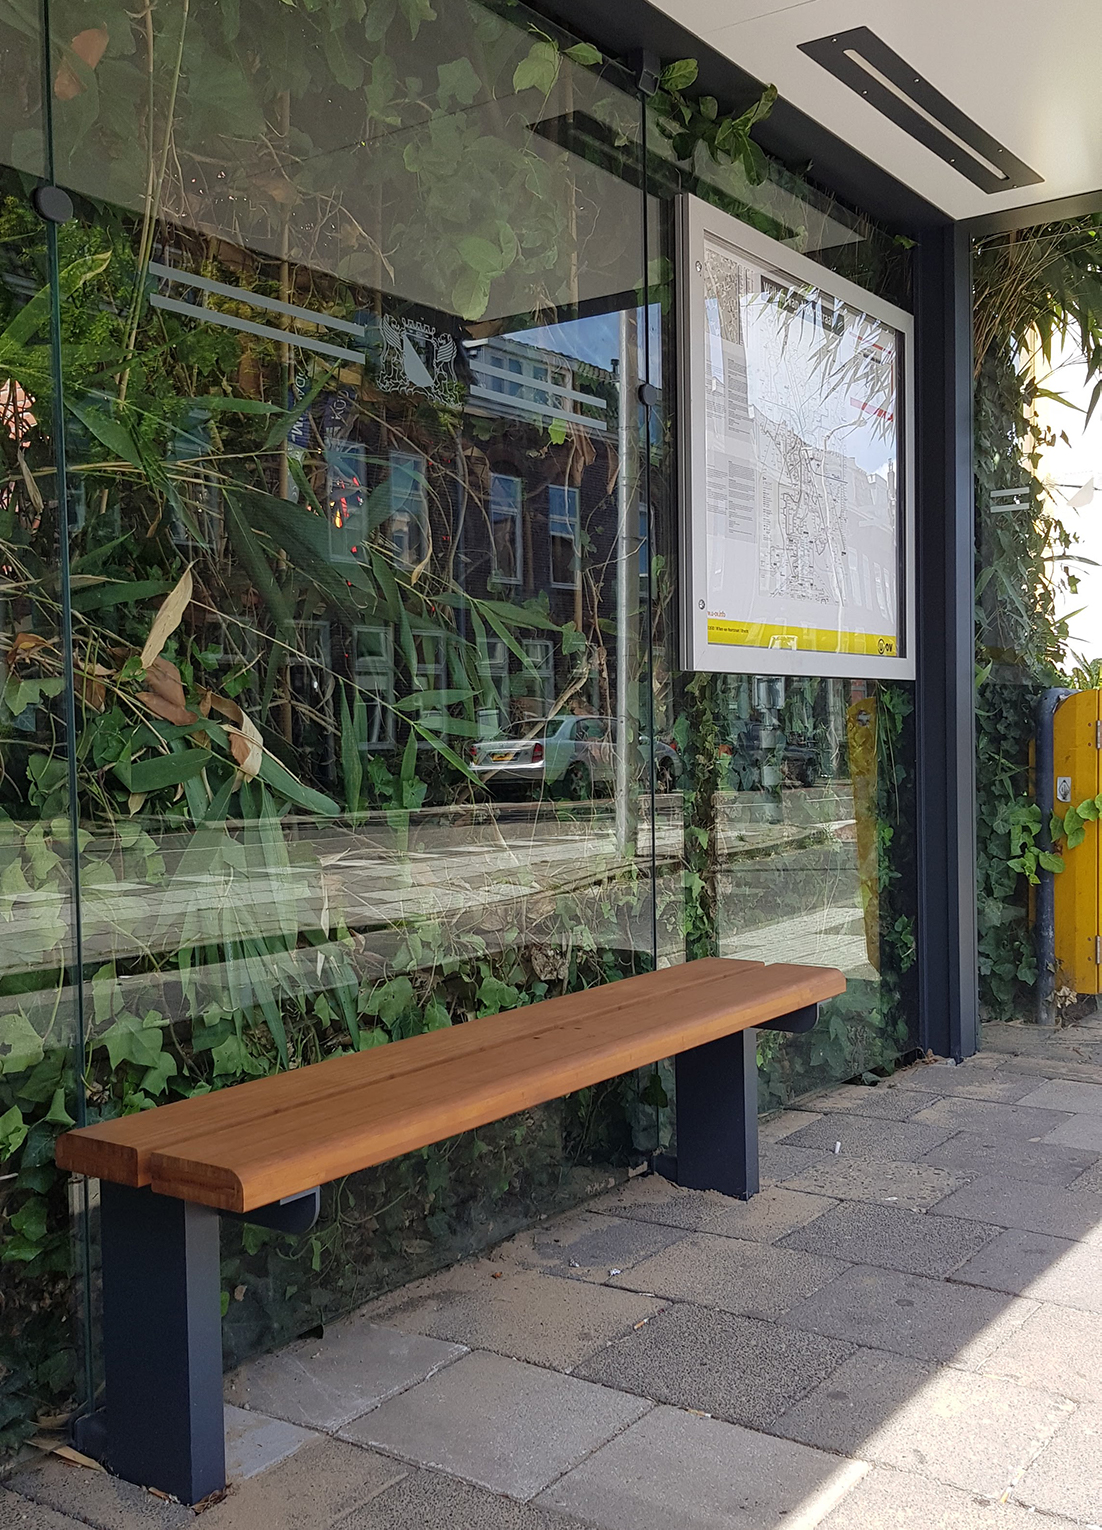 The bus stops are outfitted with efficient led lights and a bamboo bench.